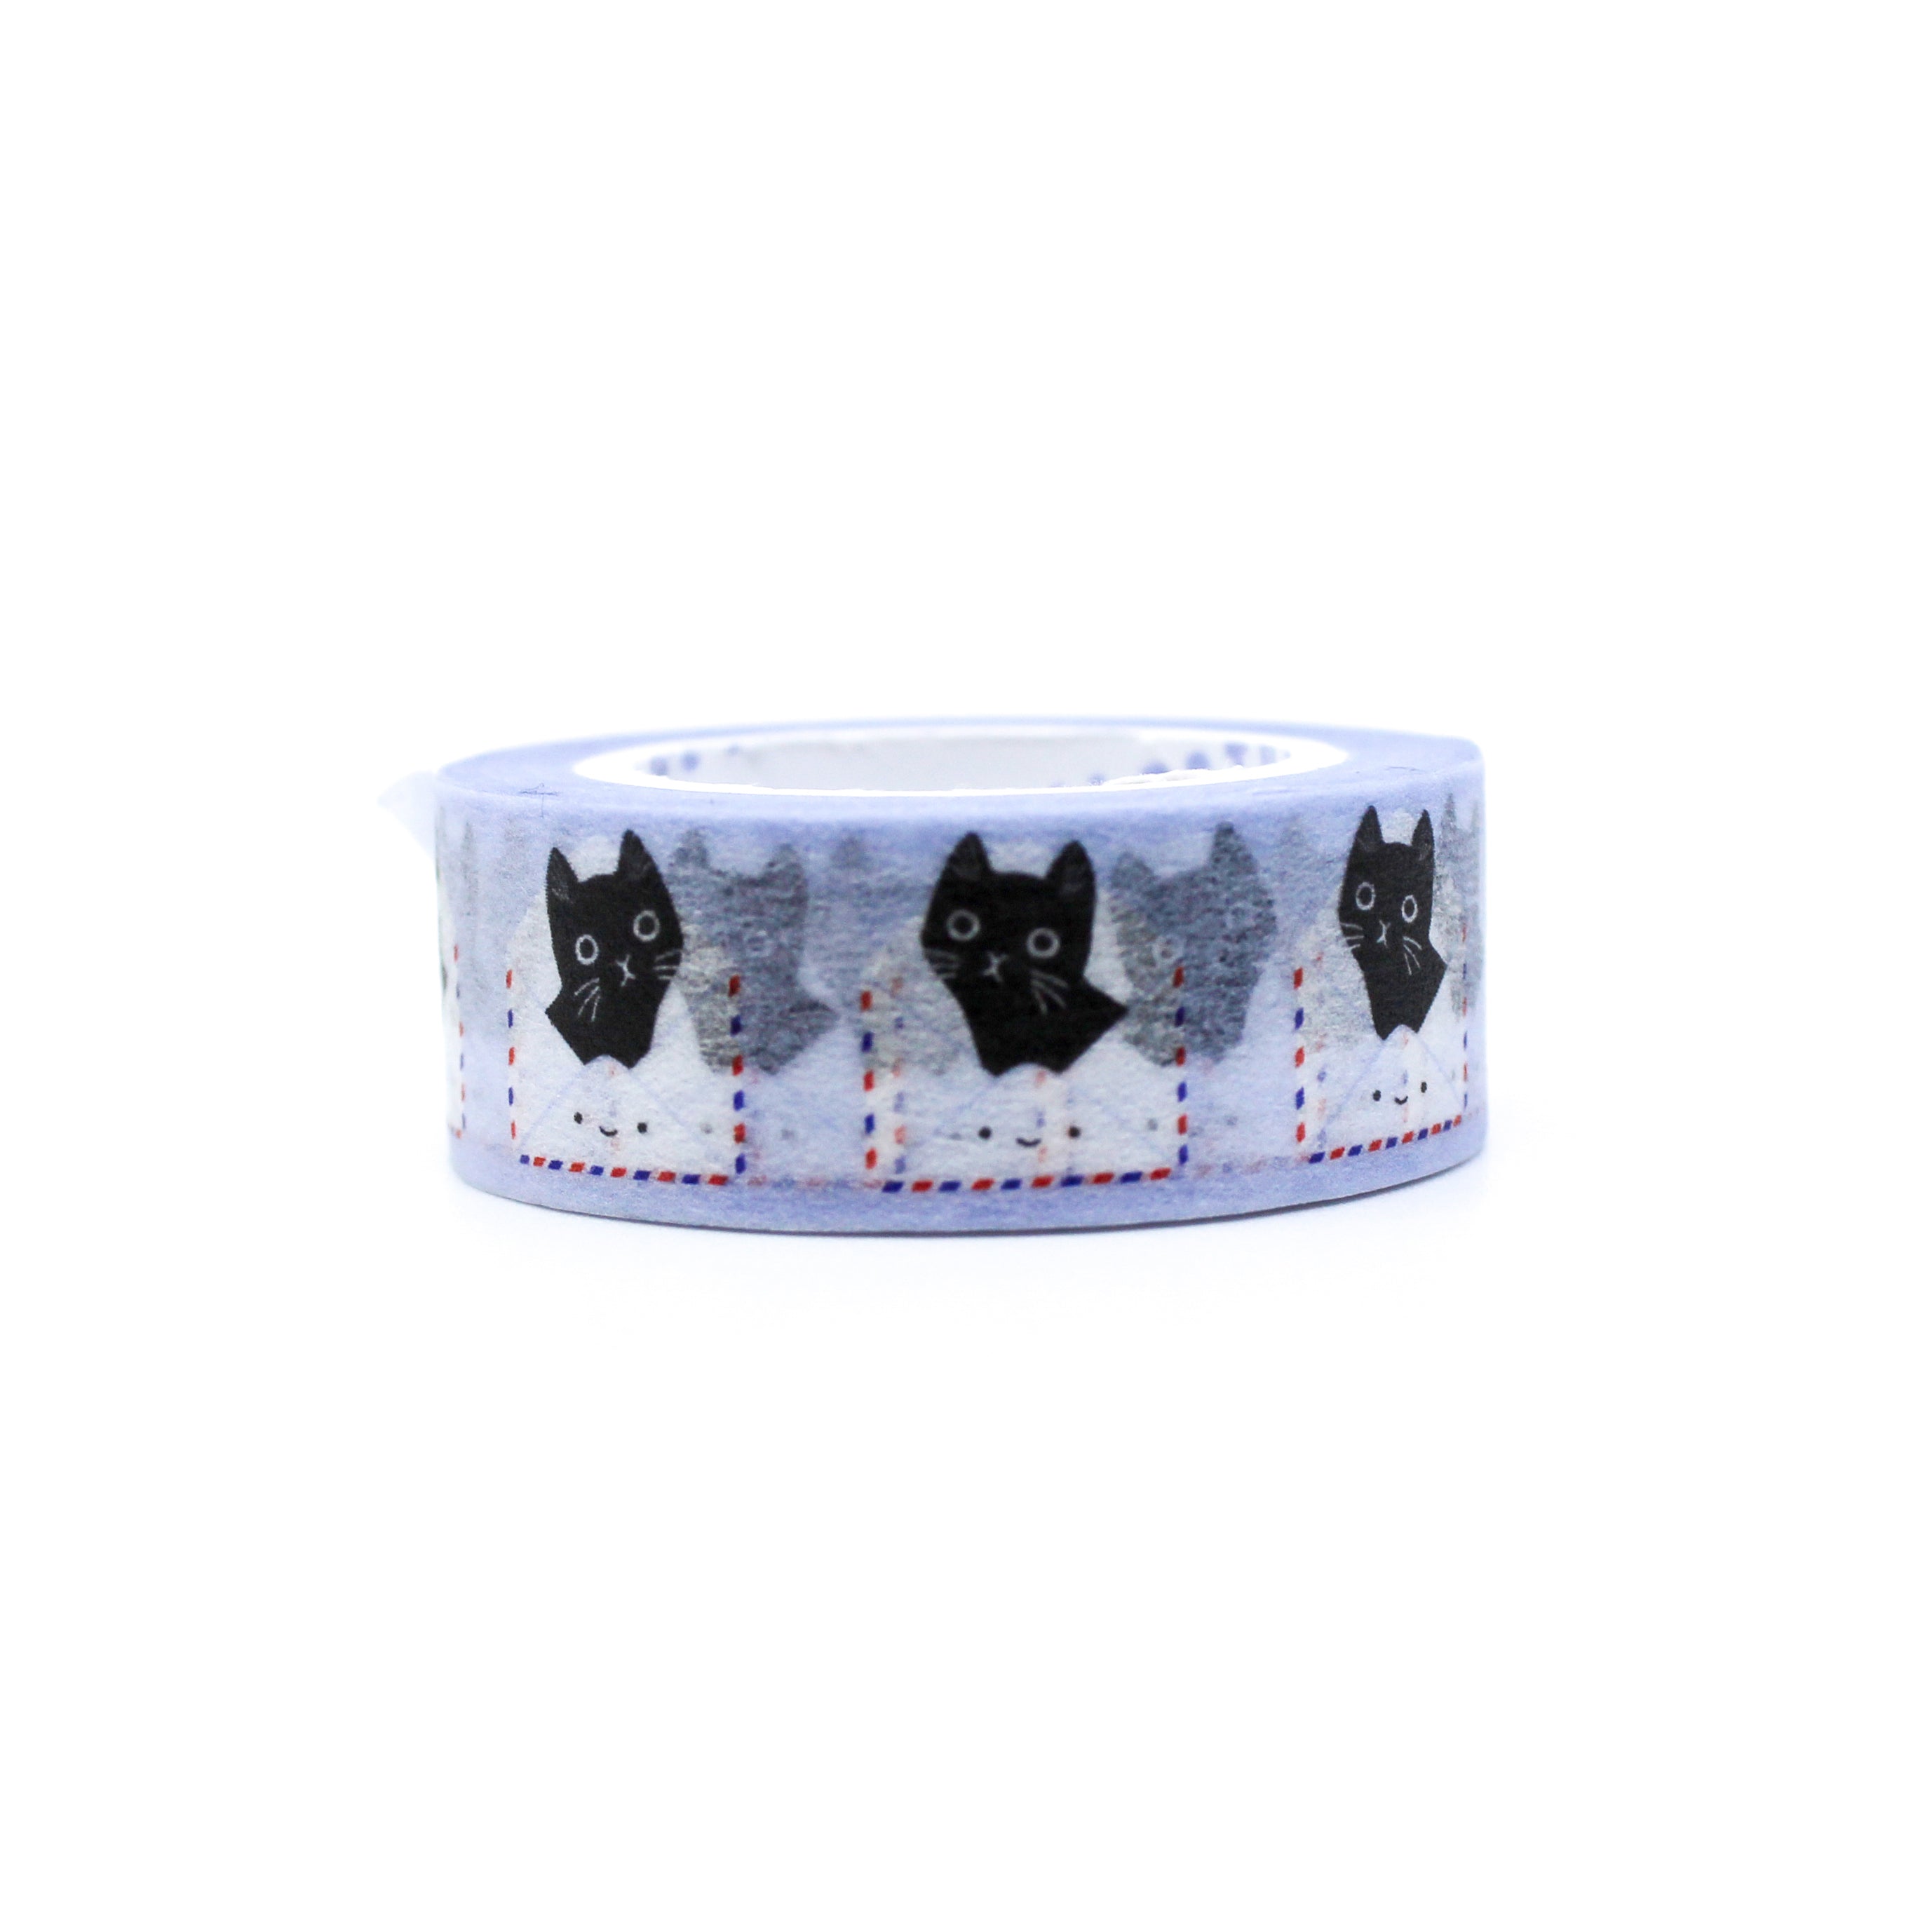 This is a cute Halloween black cat with snail mail themed envelope view of washi tape from BBB Supplies Craft Shop